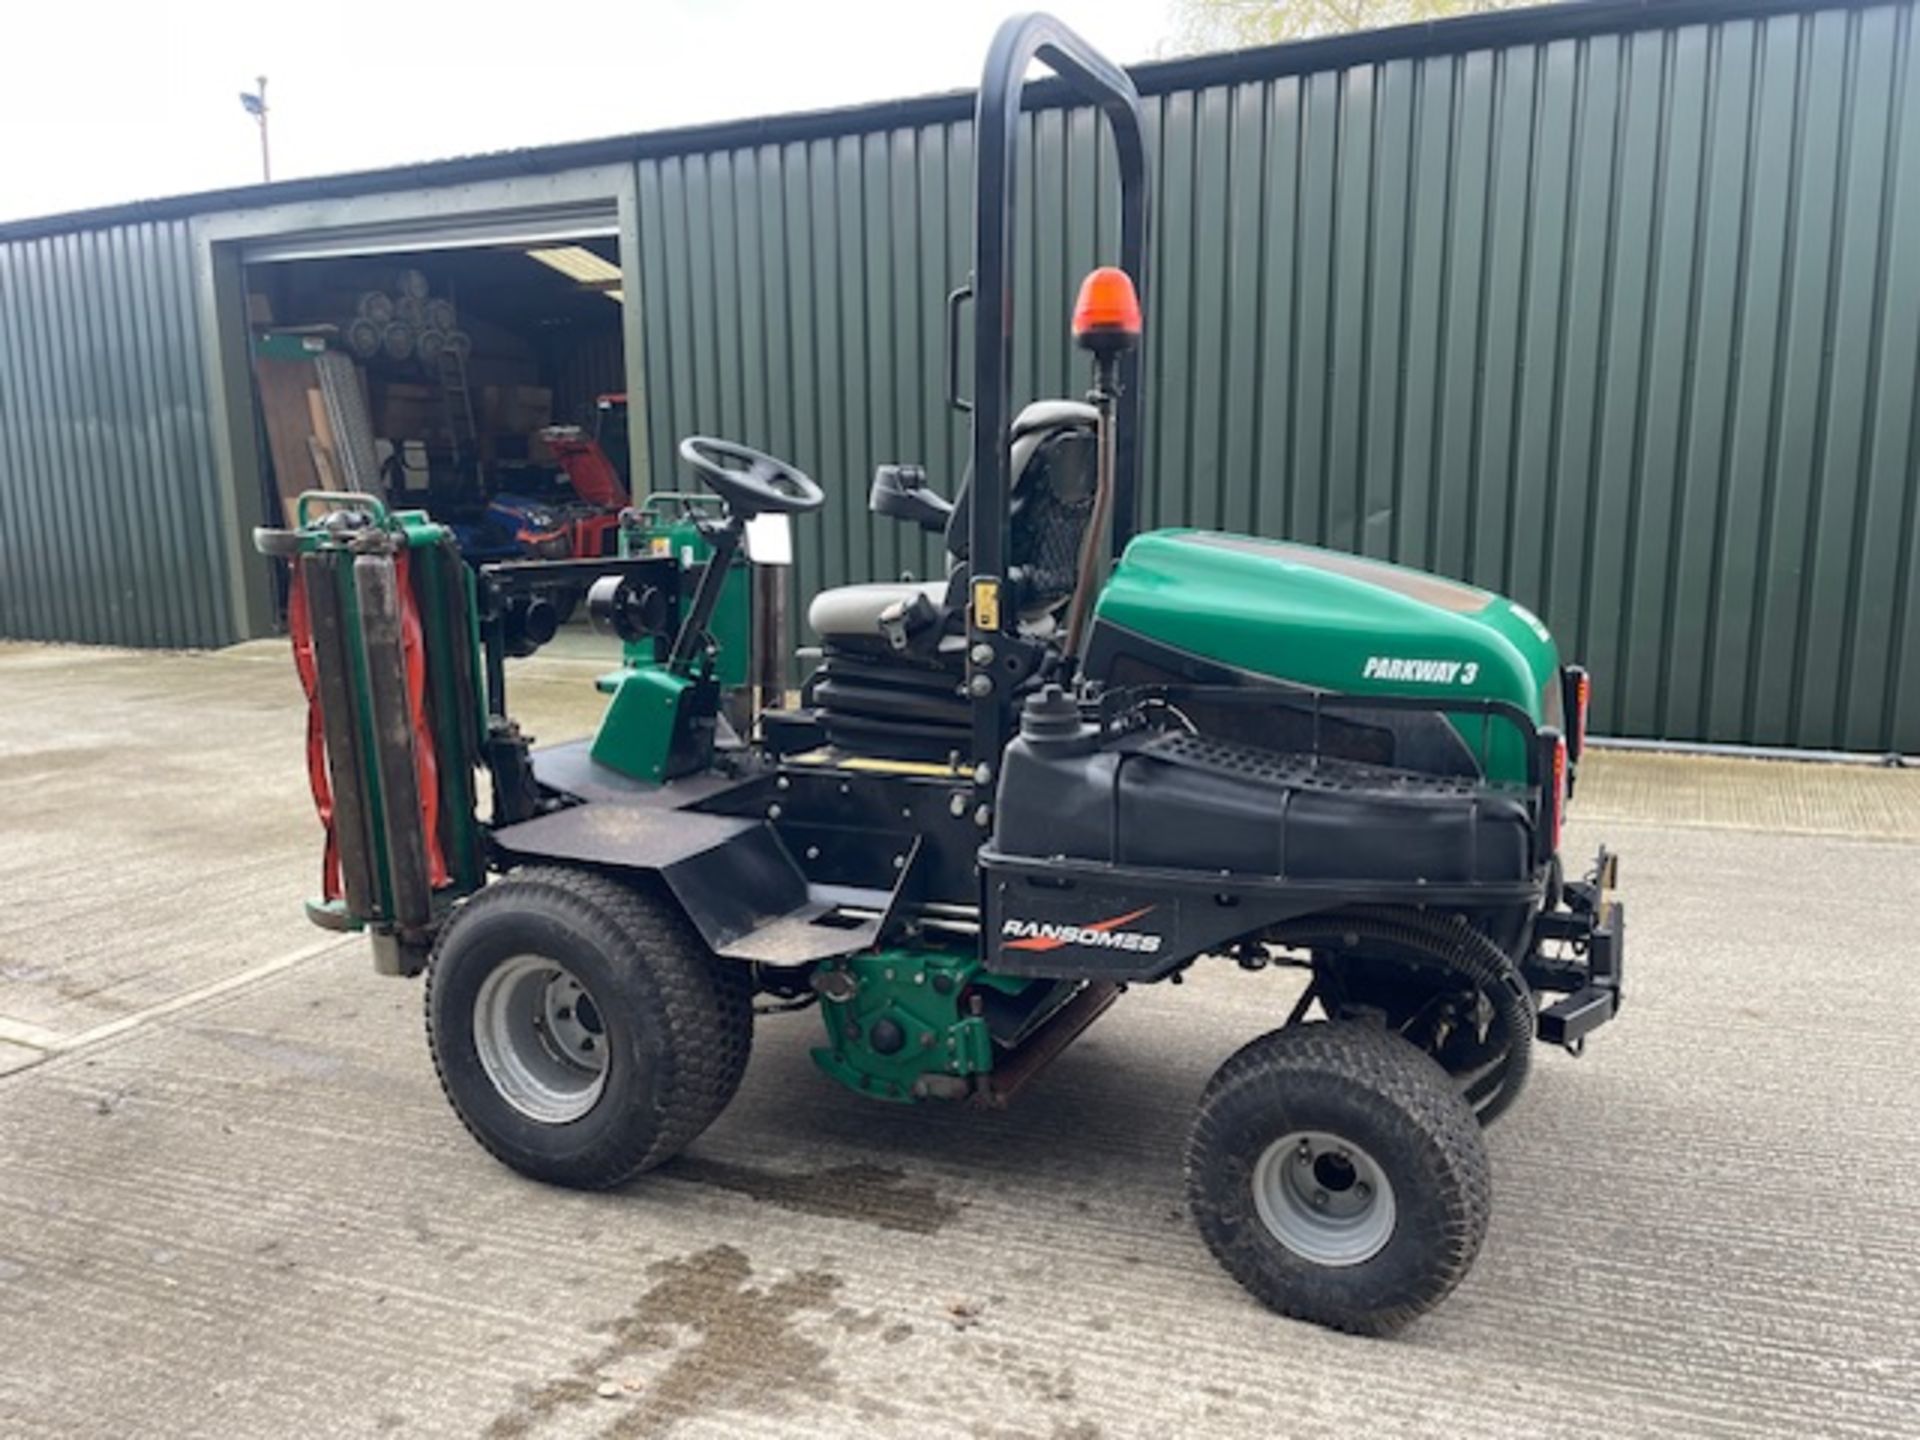 2017/2018 - RANSOMES PARKWAY 3 RIDE ON MOWER (2400 hours)